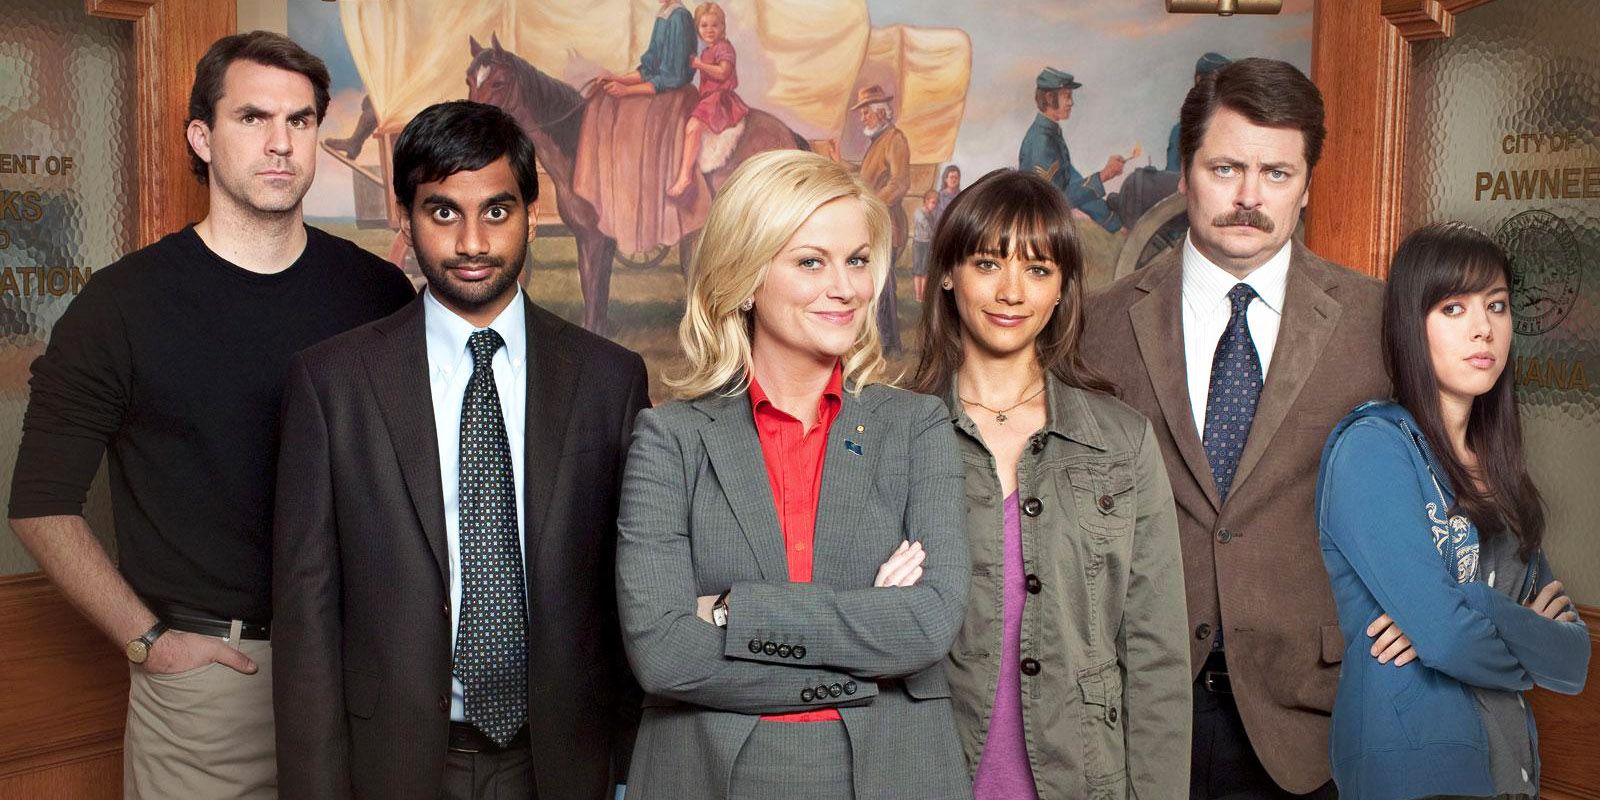 The cast of Parks and Recreation season 1